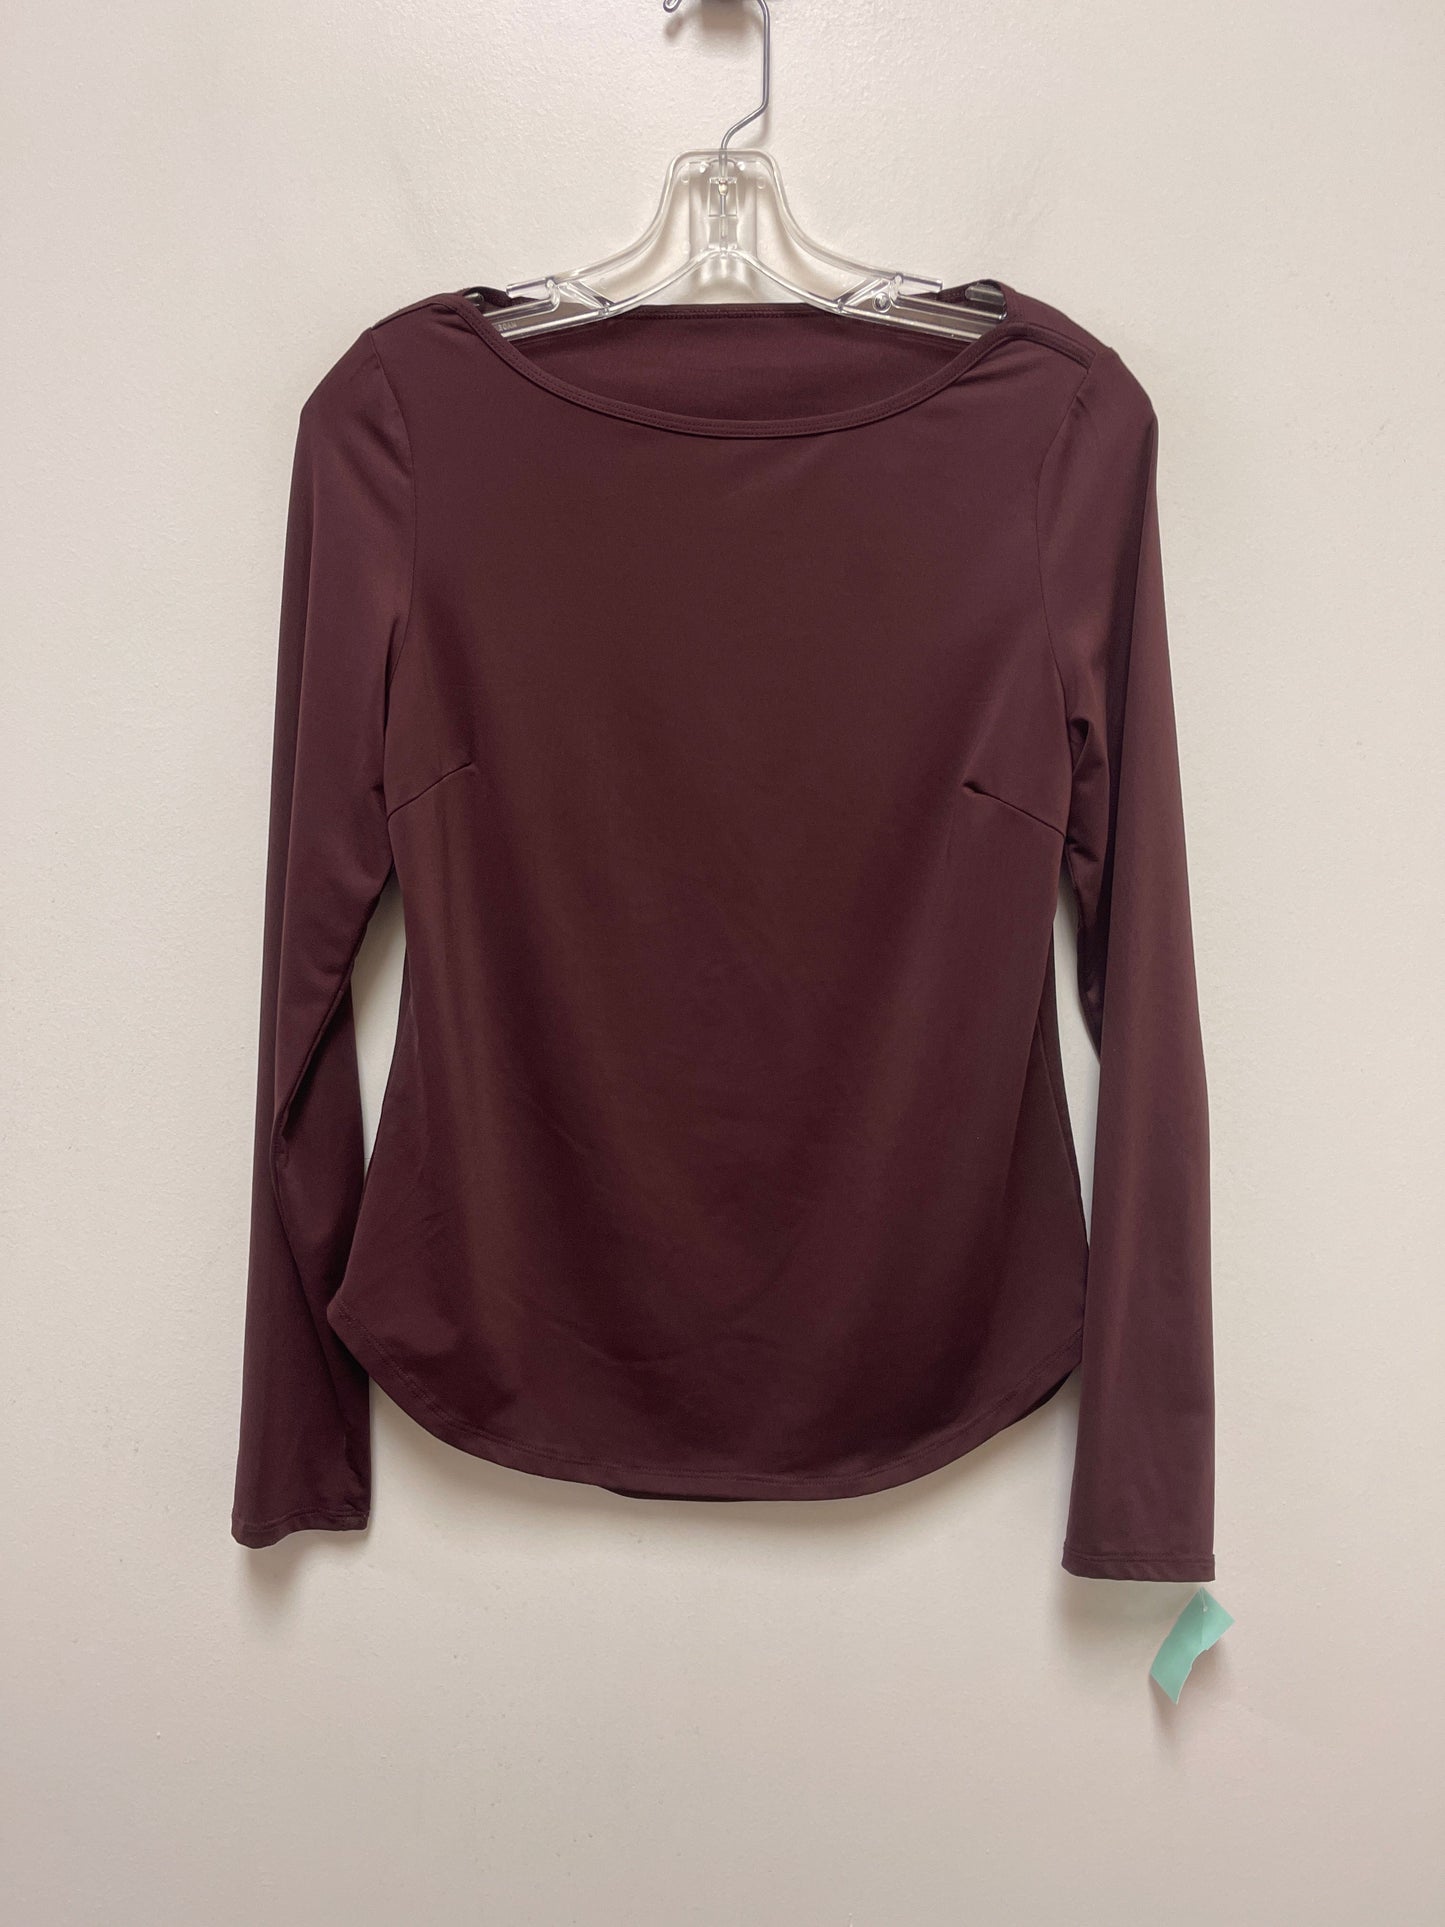 Athletic Top Long Sleeve Collar By Joy Lab  Size: S